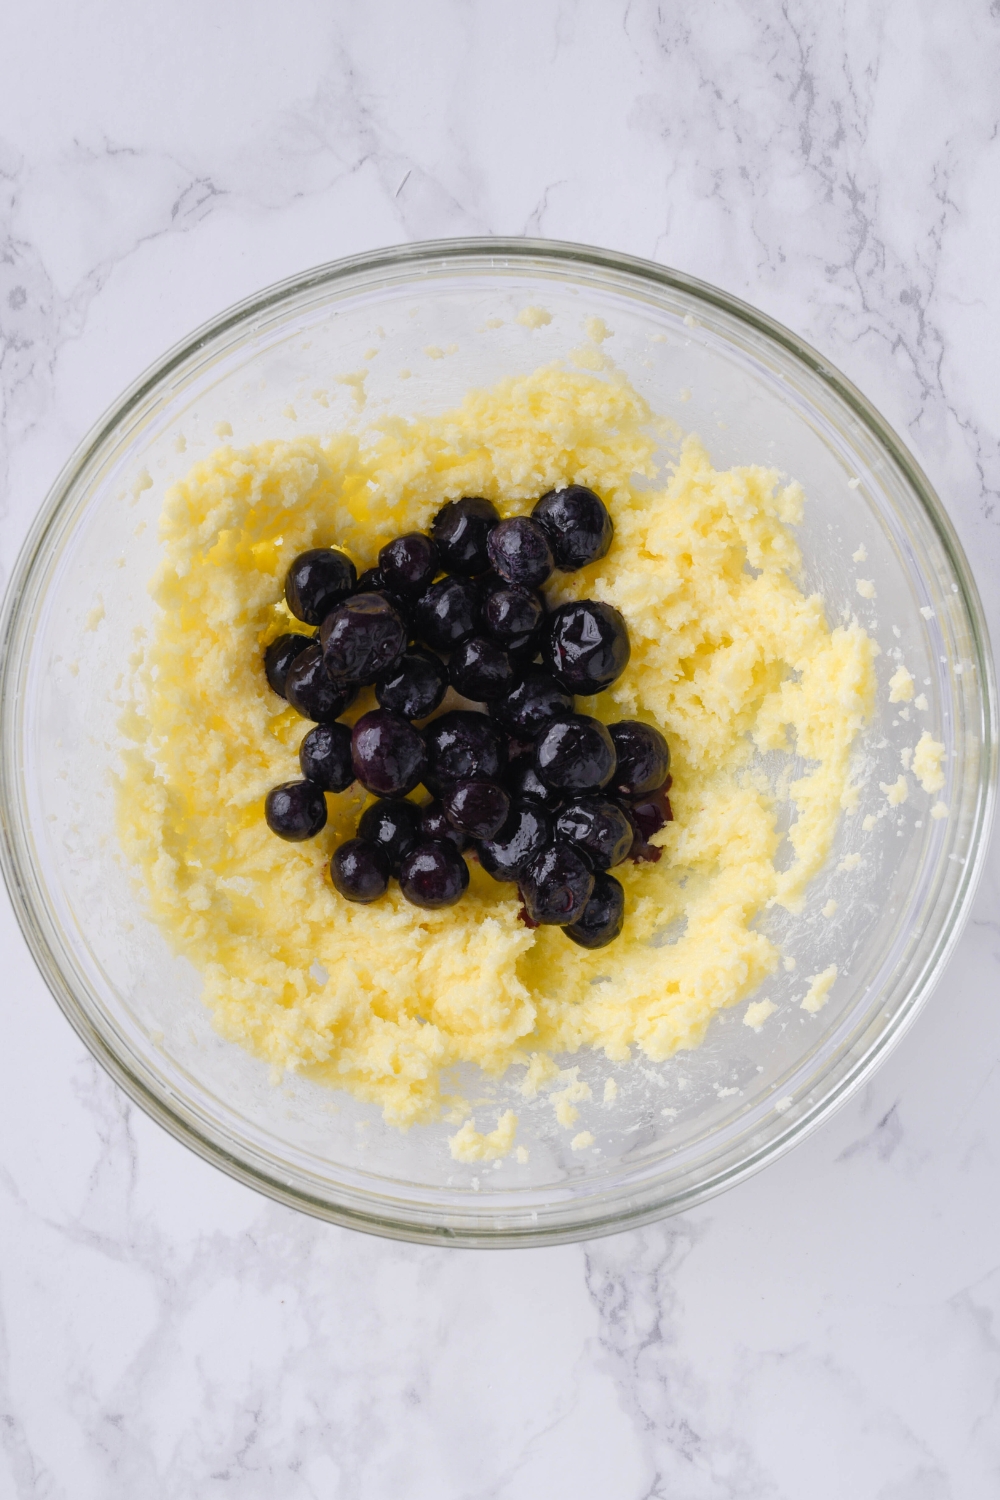 A mixing bowl with creamed butter. Blueberries have just been added to it.